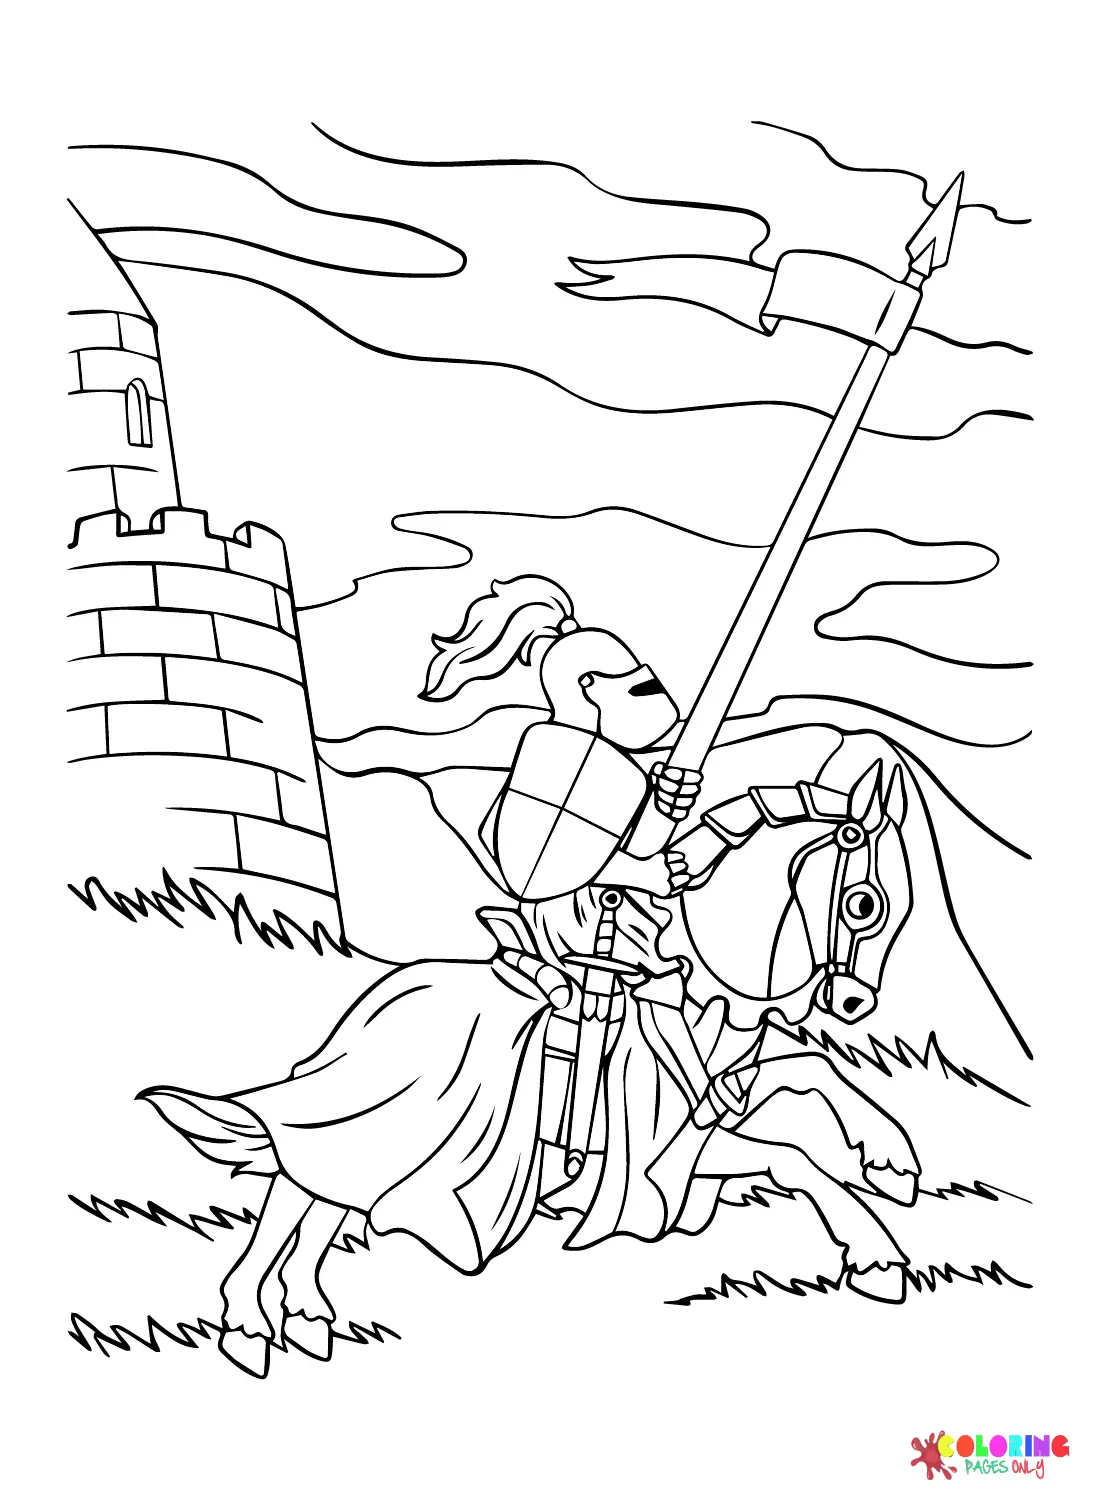 Ancient Rome and Roman Empire Coloring Pages